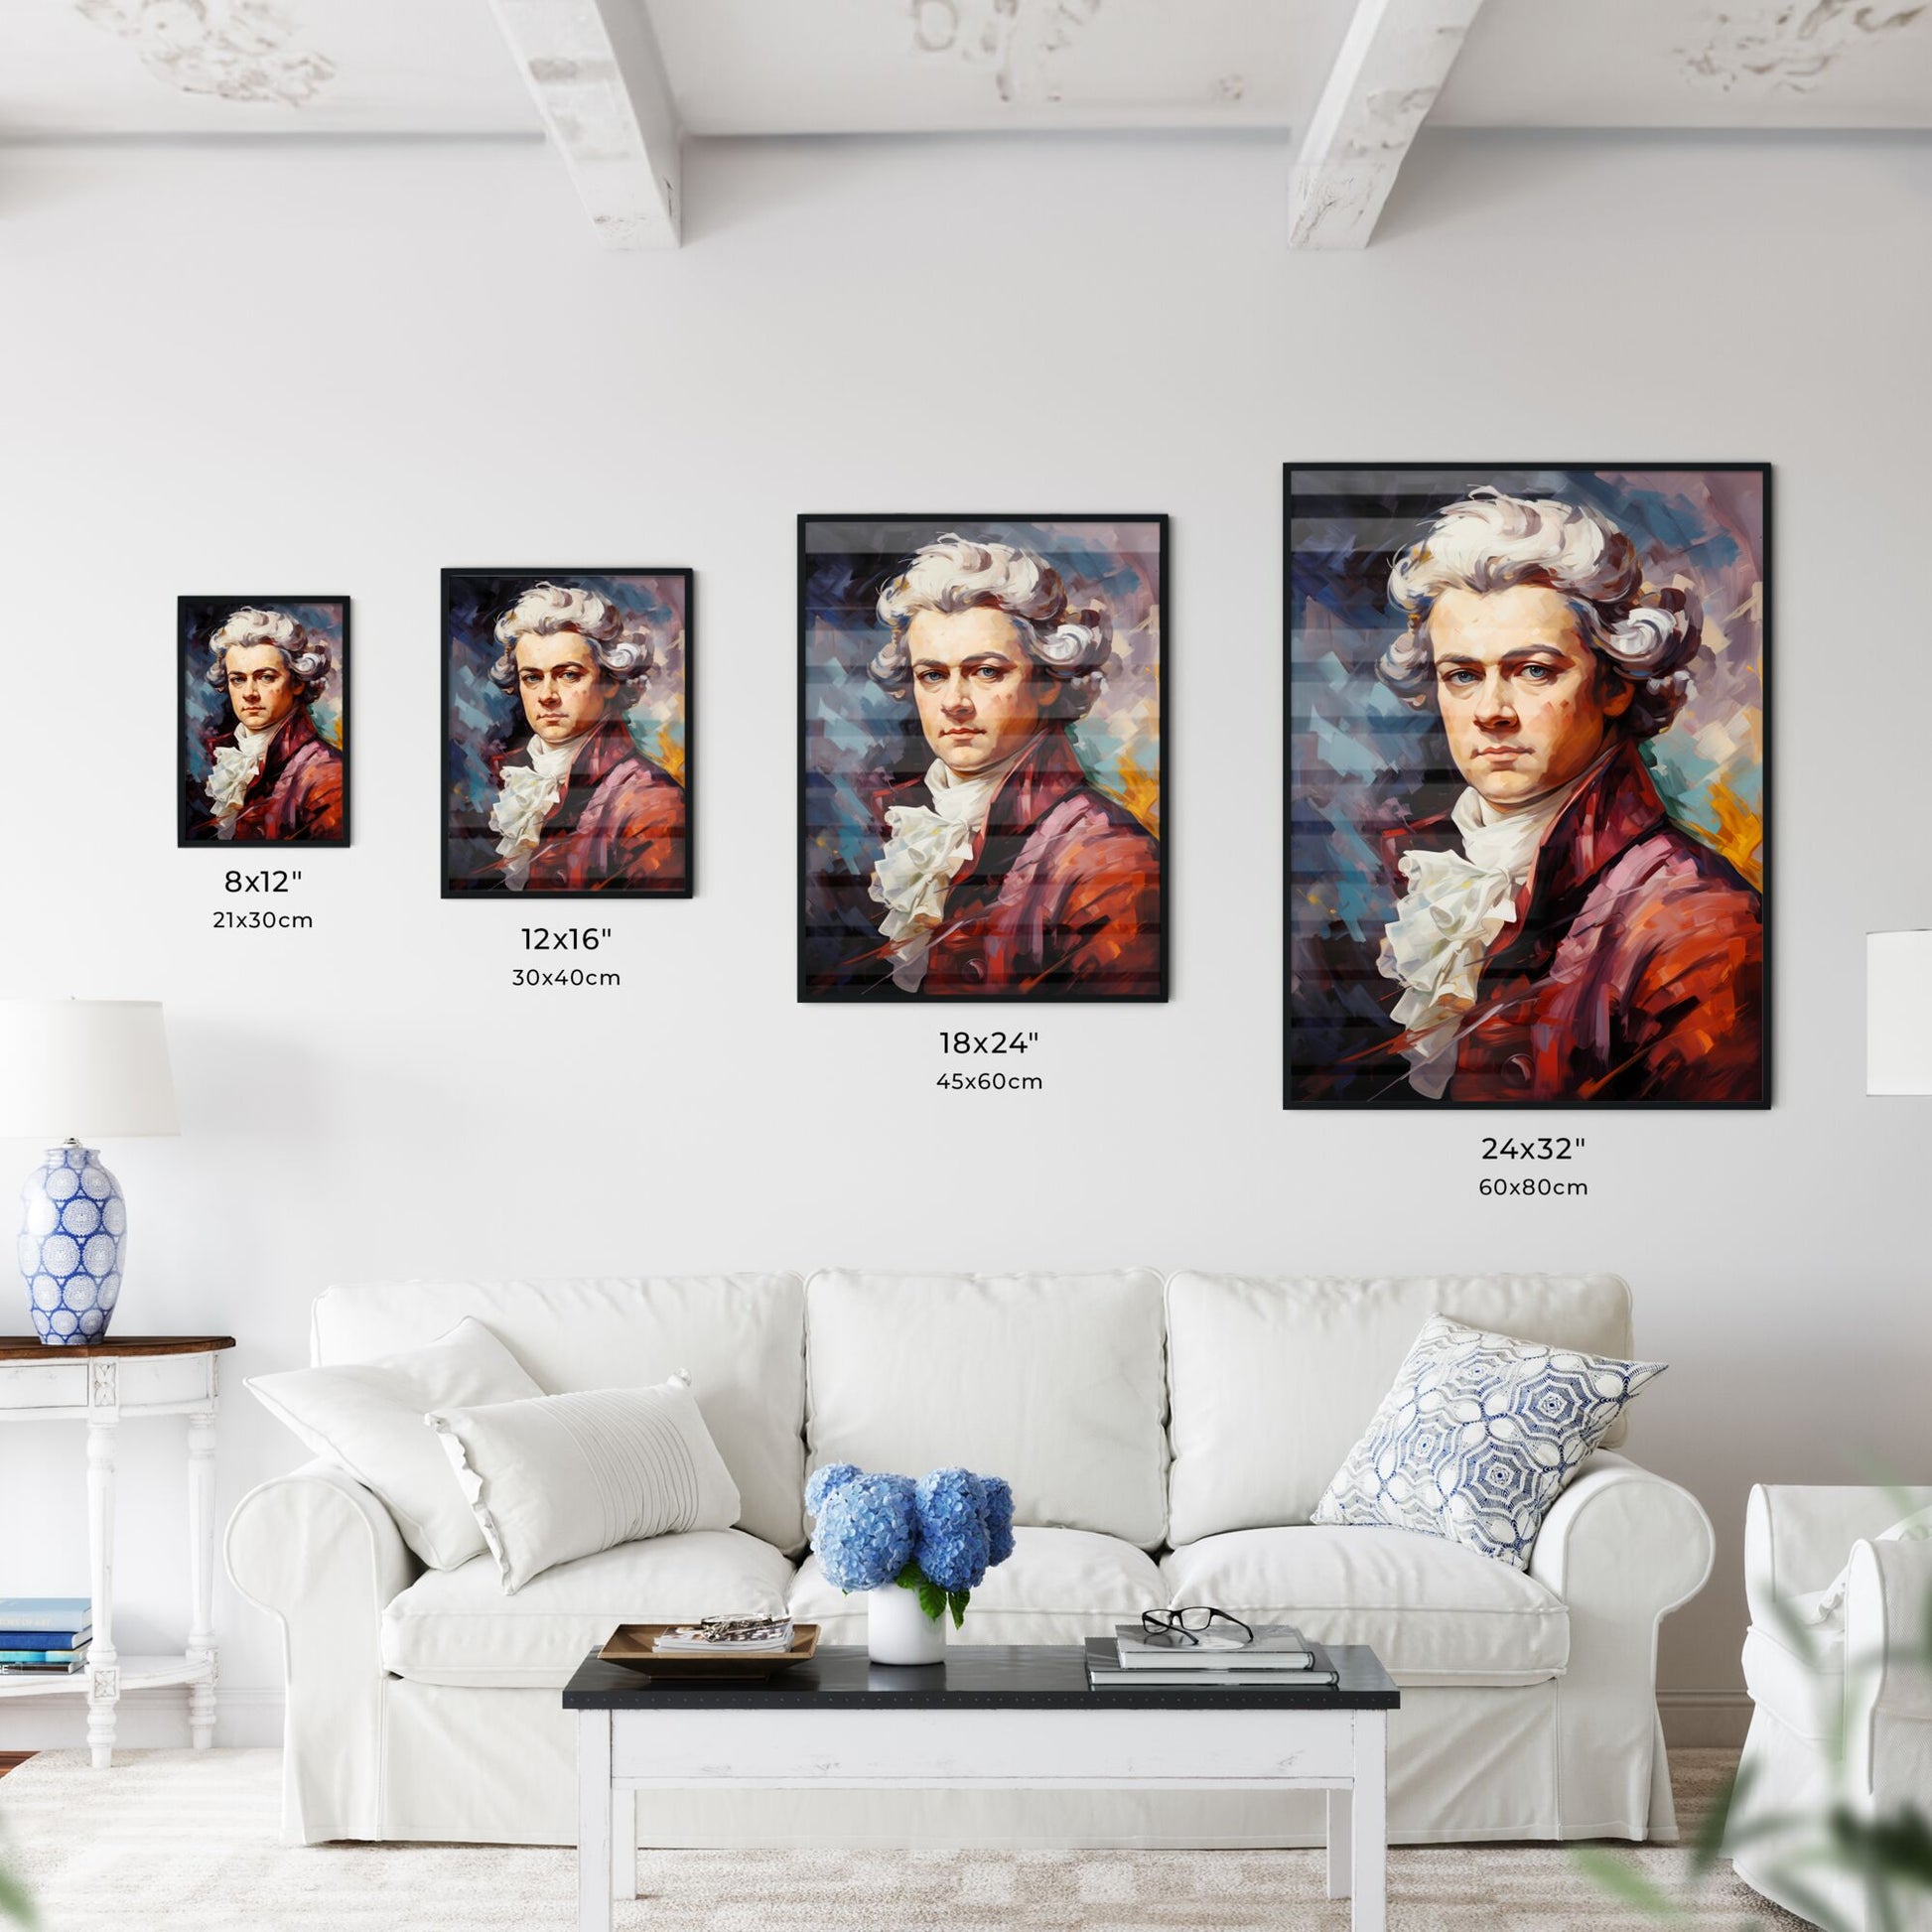 Wolfgang Amadeus Mozart - A Painting Of A Man Default Title